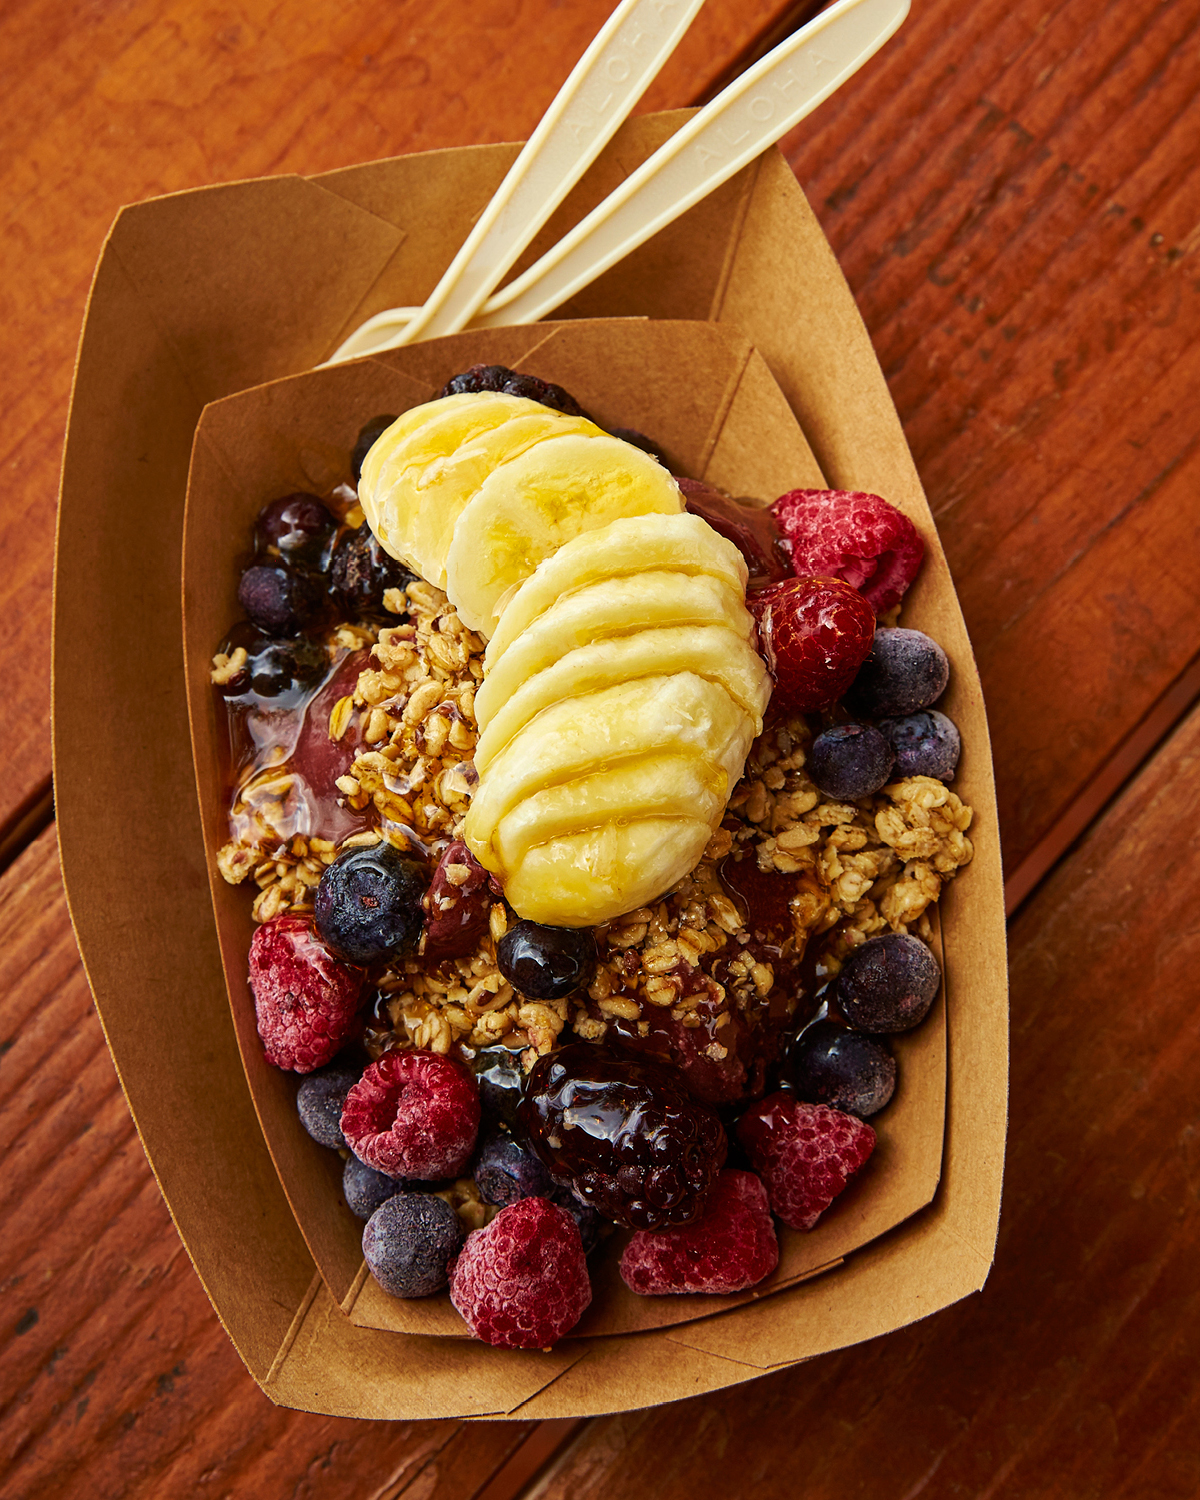  EVER-SO-POPULAR ACAI BOWL AT SHARKS COVE GRILL 